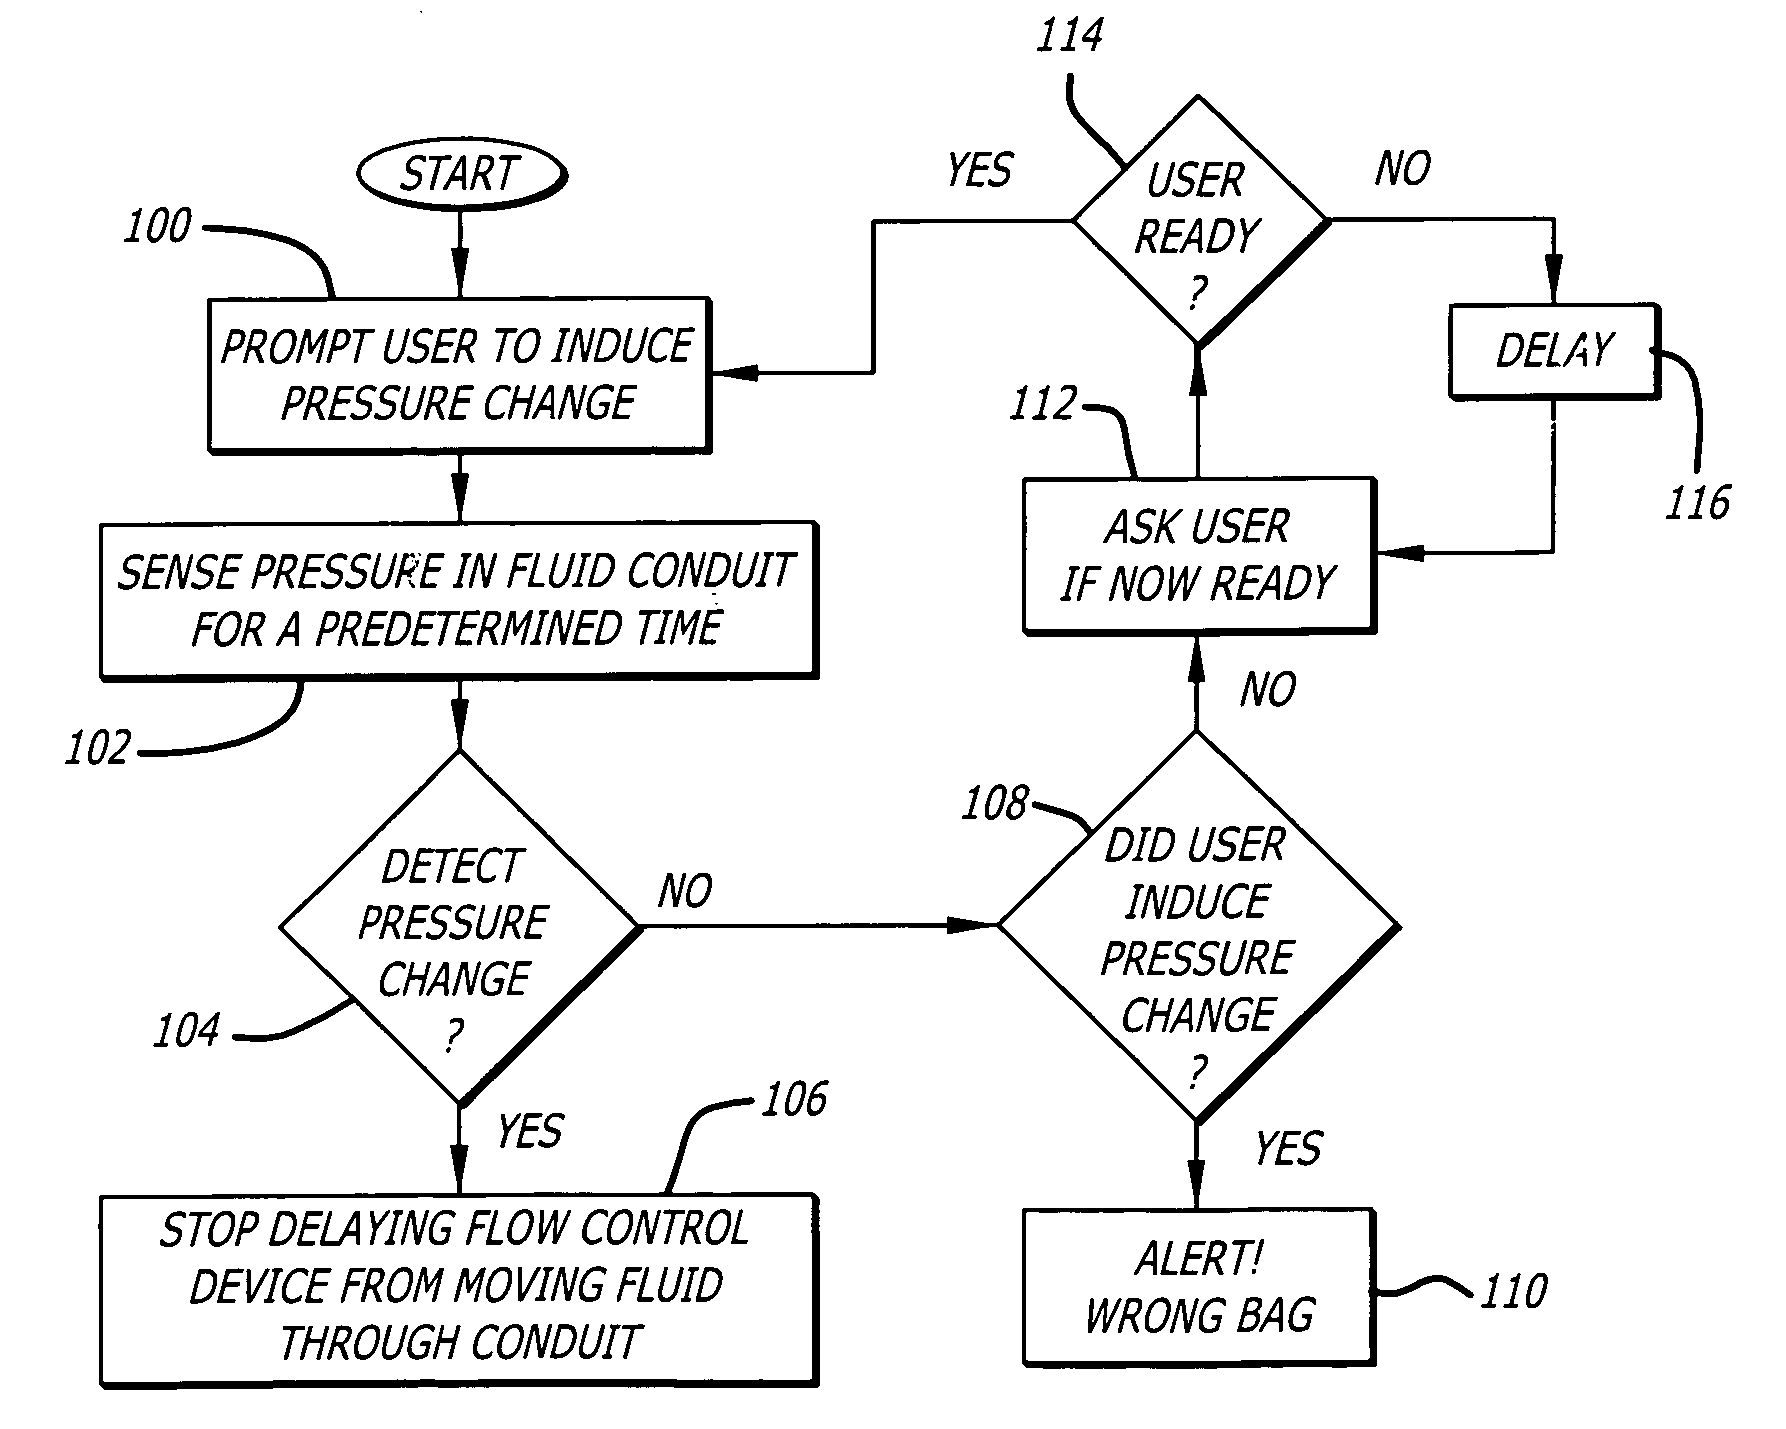 System and method for verifying connection of correct fluid supply to an infusion pump